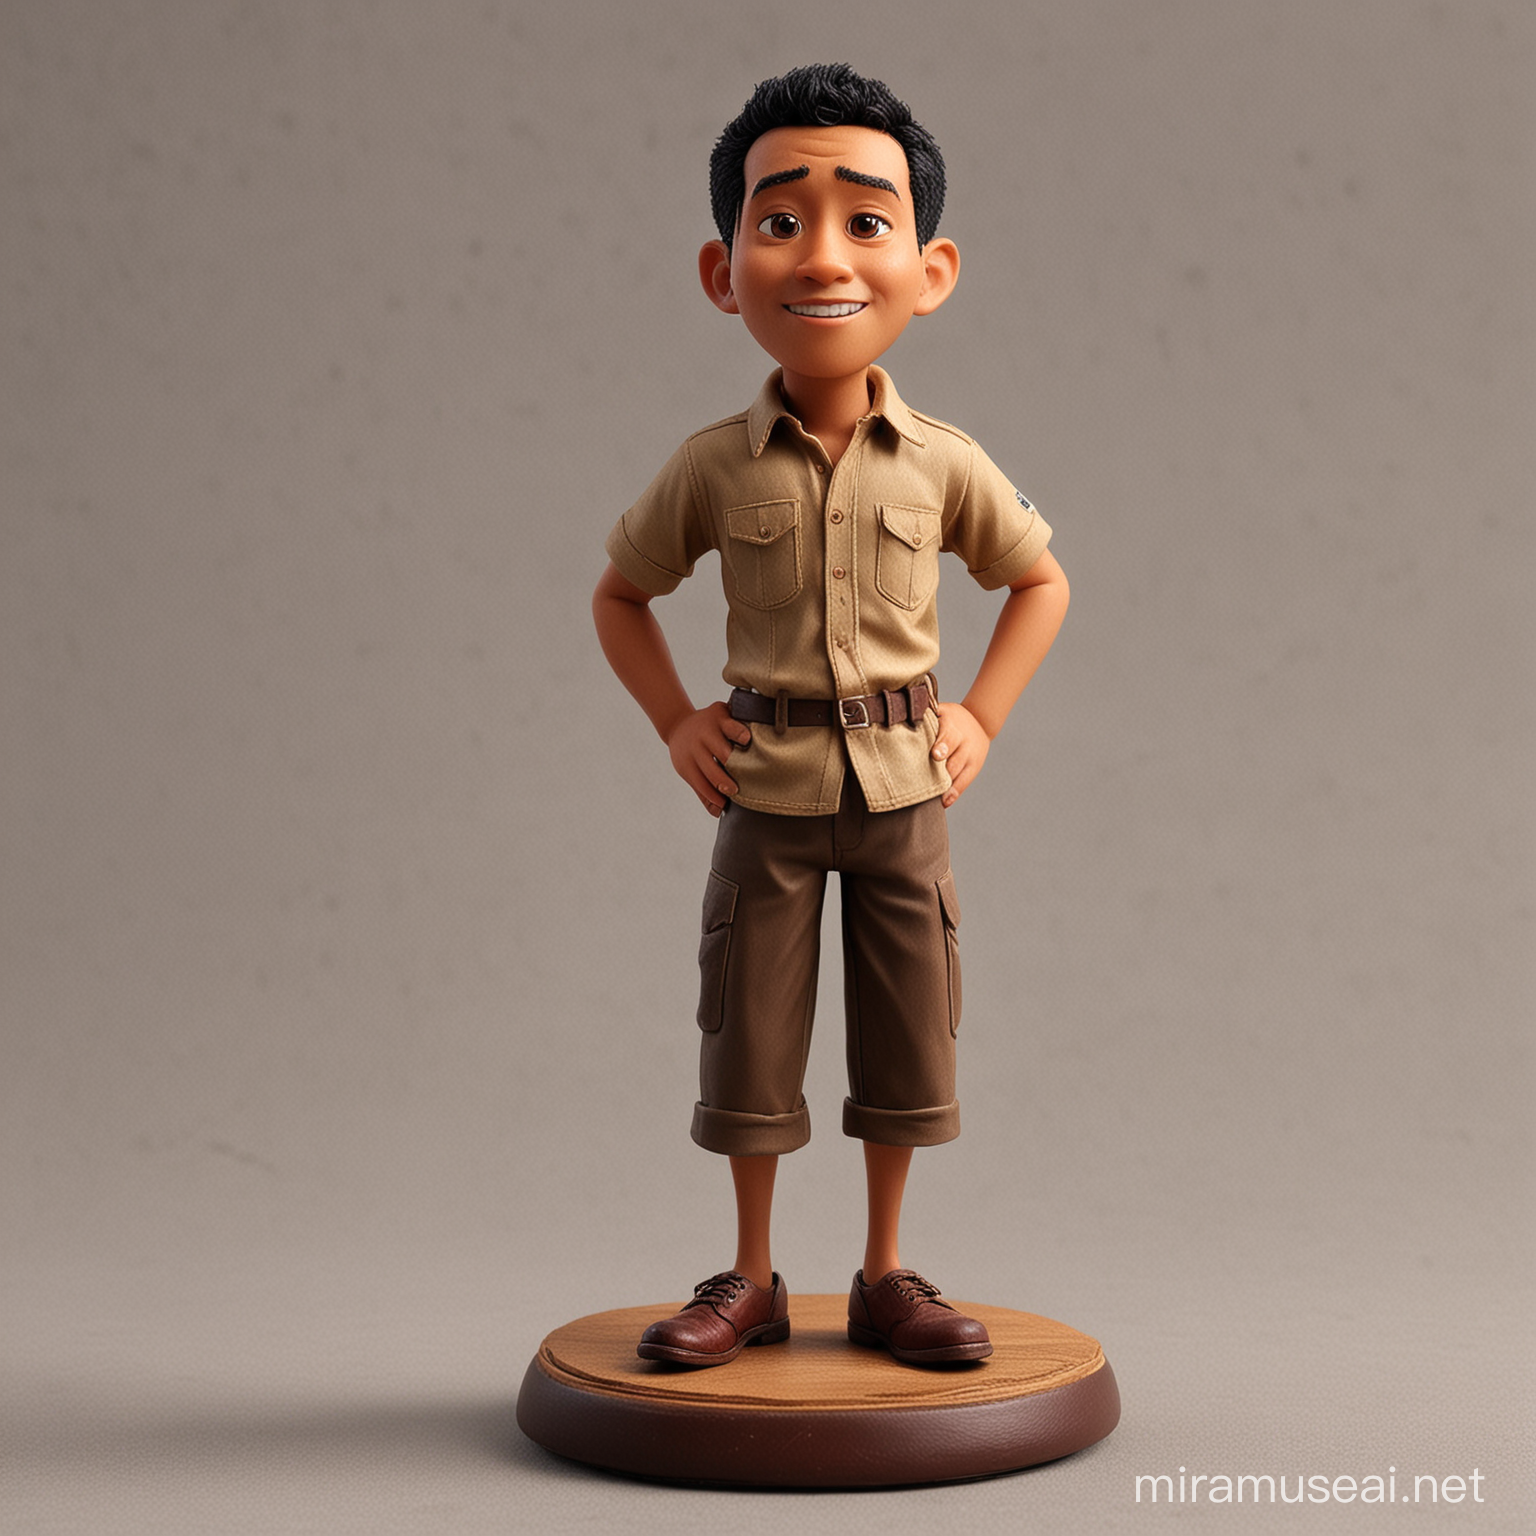 A miniature indonesian guy 1/16 standing in the table,pixar character,realistic